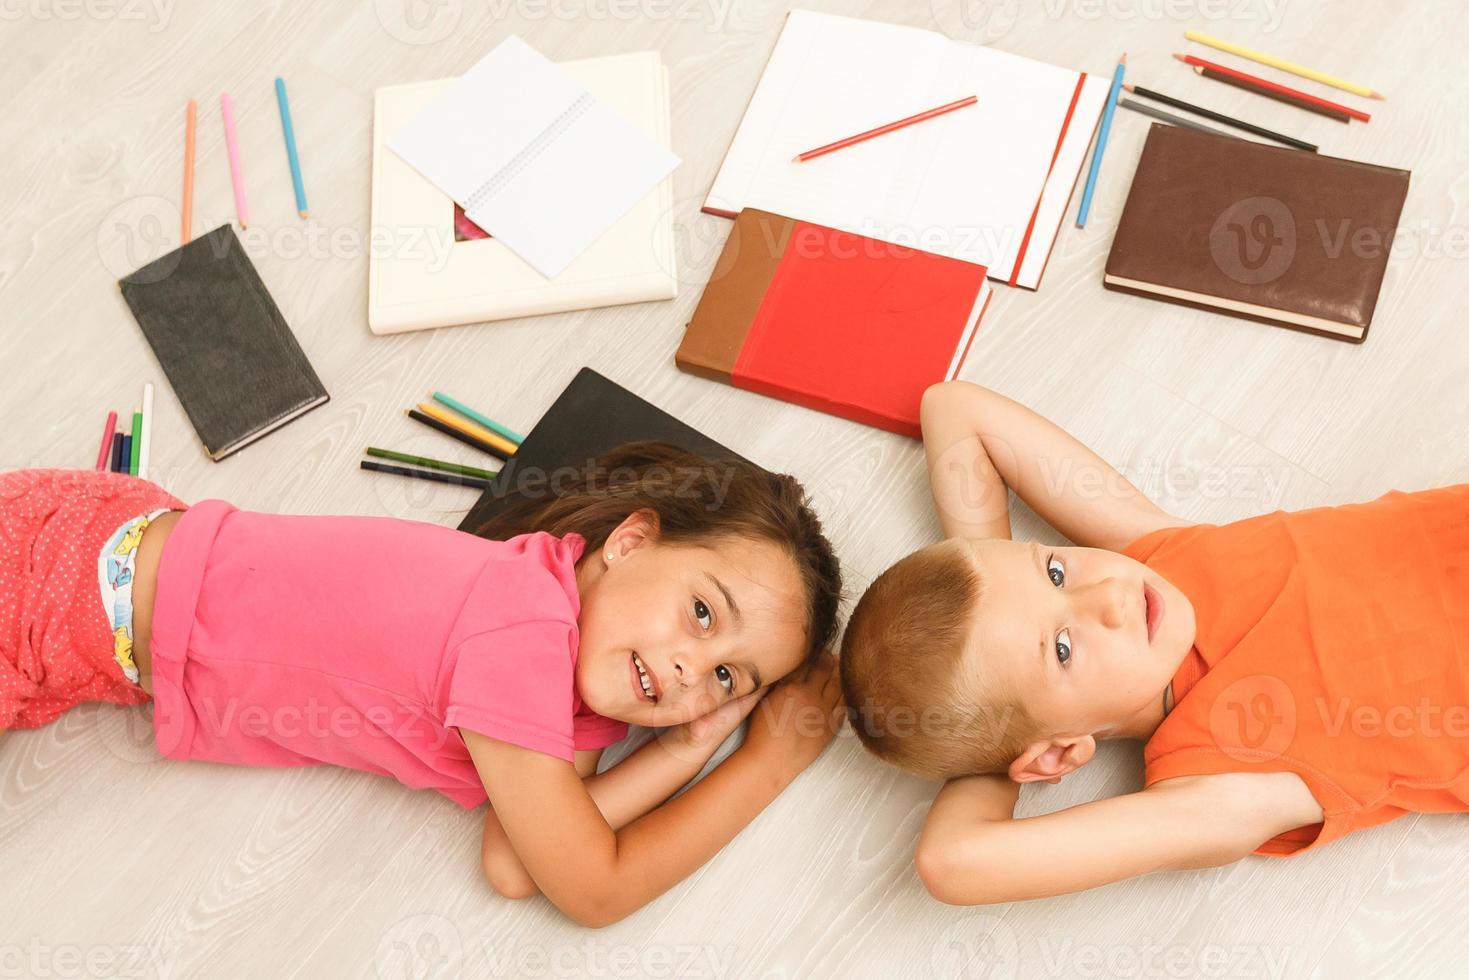 Happy children. Top view creative photo of little boy and girl on vintage brown wooden floor. Children lying near books and toys, and painting